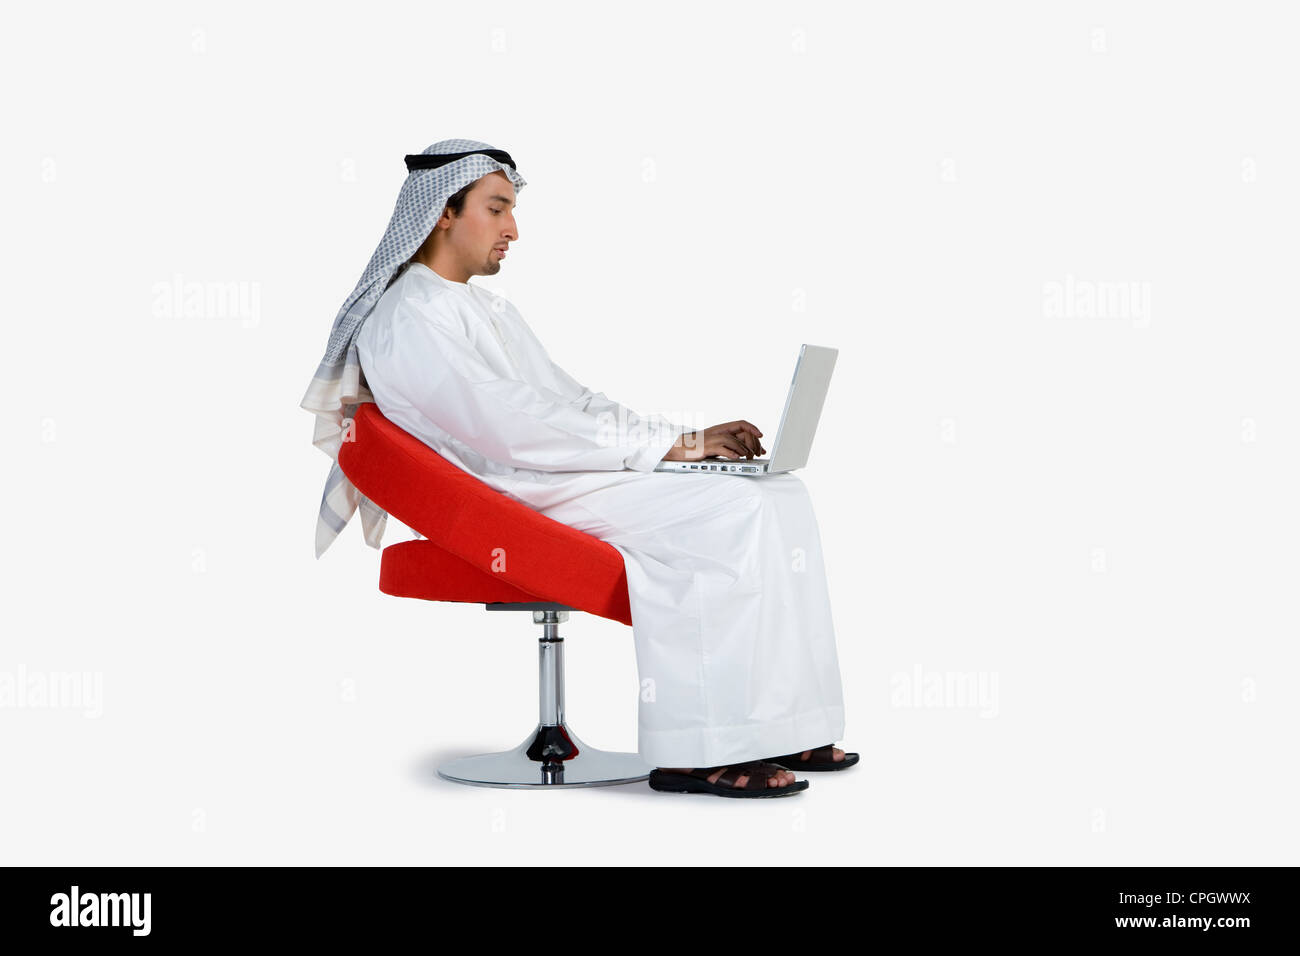 Young man sitting on chair, using laptop Stock Photo